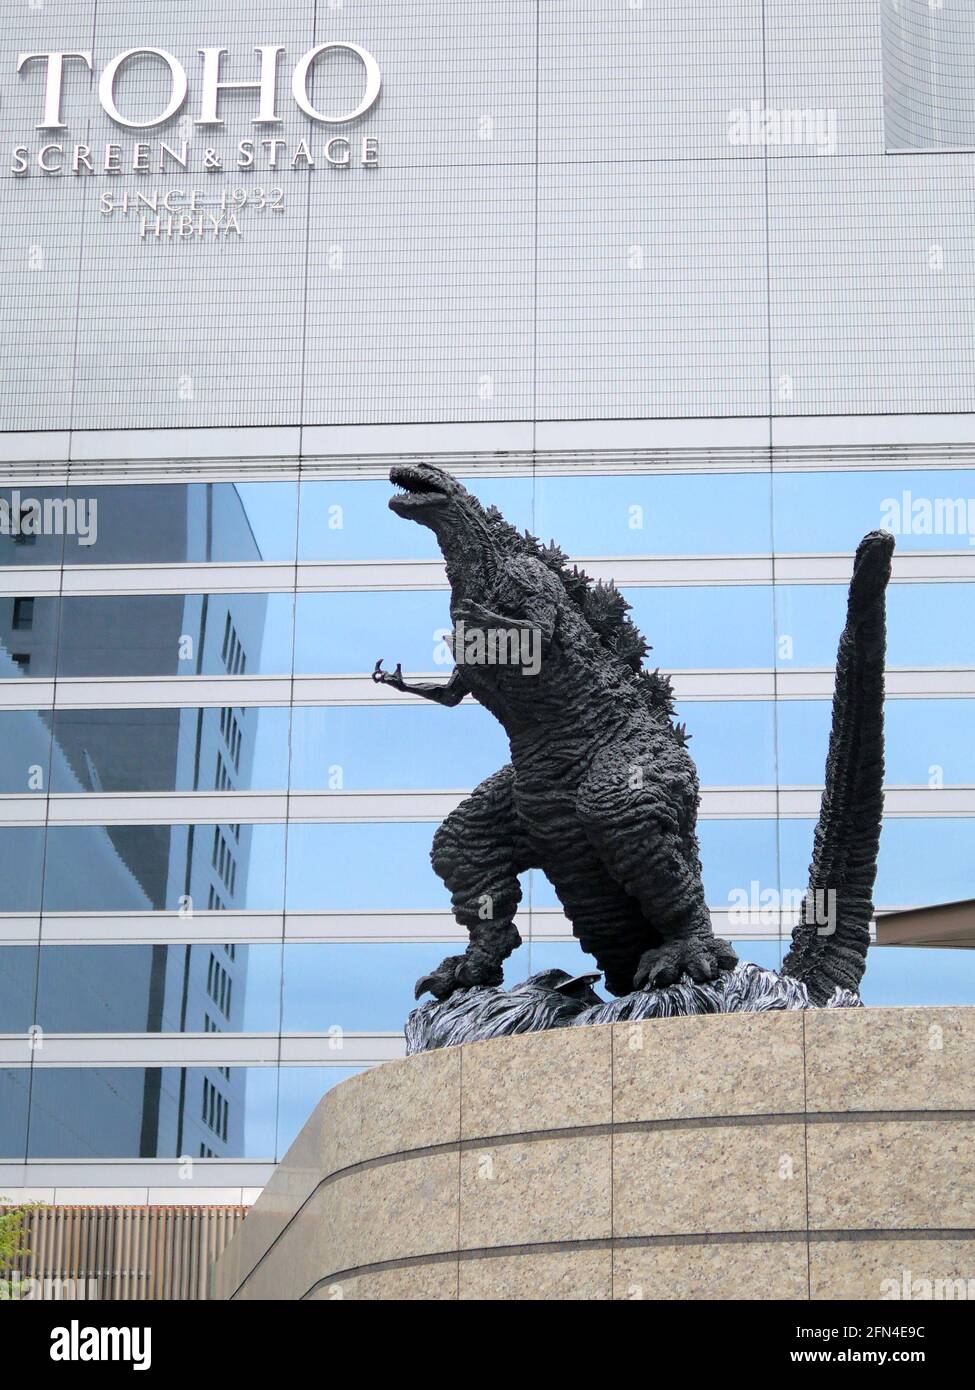 Shin Godzilla statue in Hibiya Godzilla Square. Huge statue of the famous radioactive monster in front of a revamped shopping mall. Stock Photo